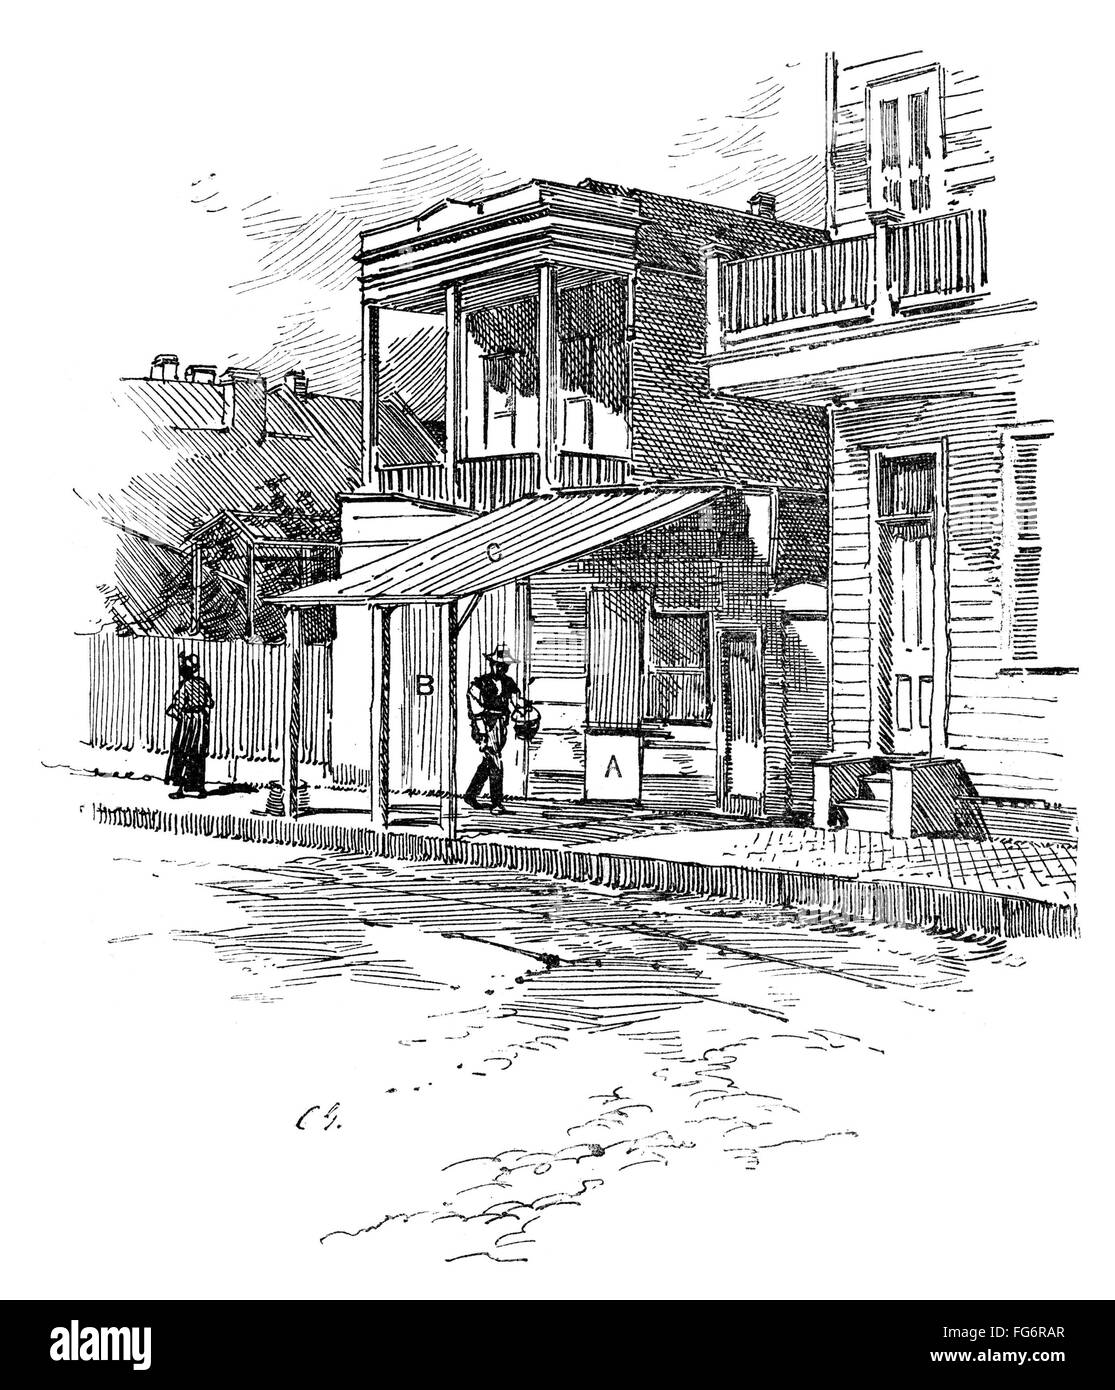 NEW ORLEANS: MAFIA, 1890. /nPlace on Girod Street in New Orleans where members of the mafia hid before shooting Chief of Police David Hennessy 15 October 1890. Contemporary American engraving. Stock Photo